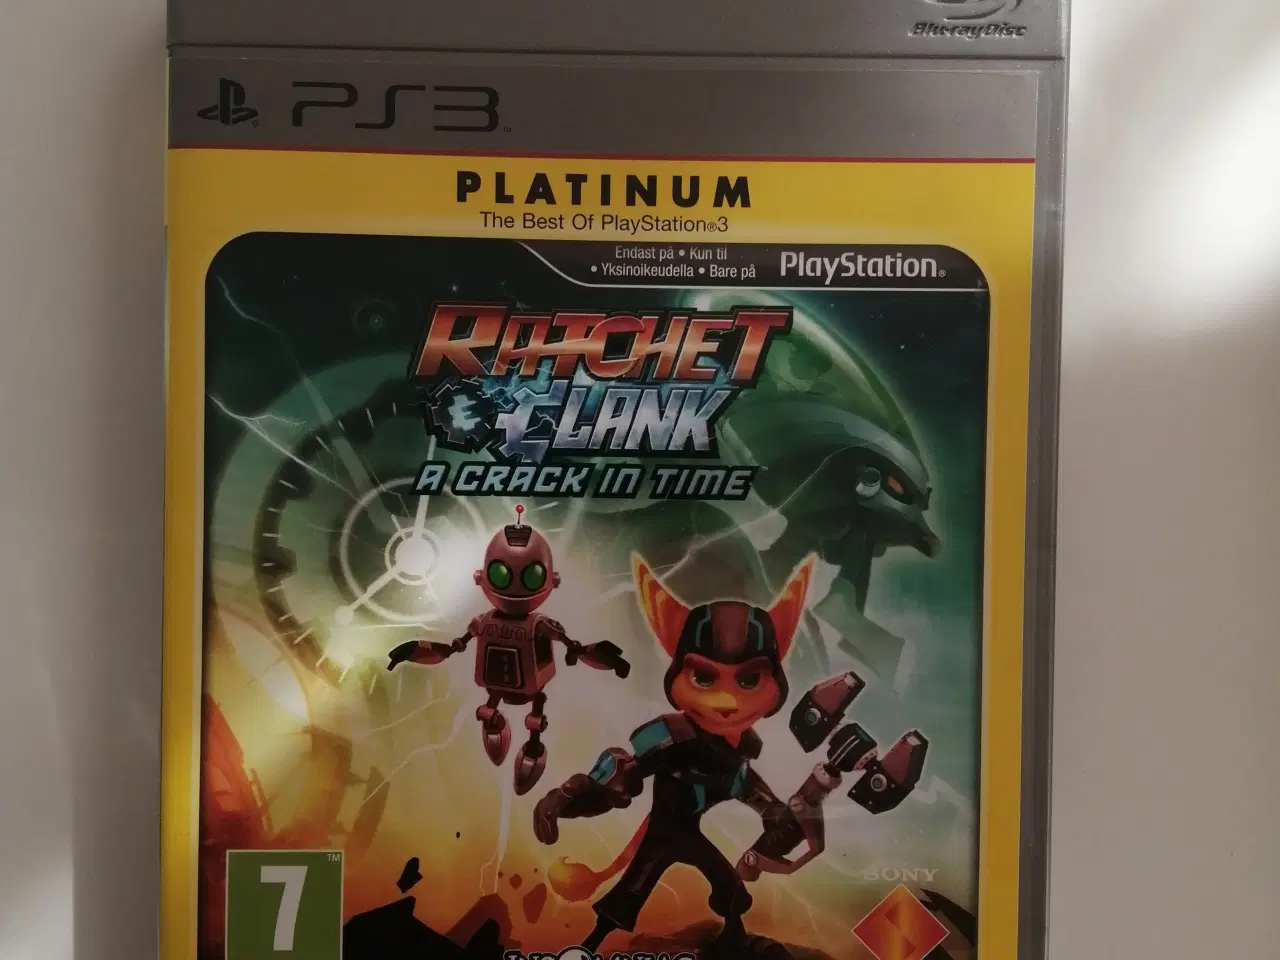 Billede 1 - Ratchet and clank a crack in time